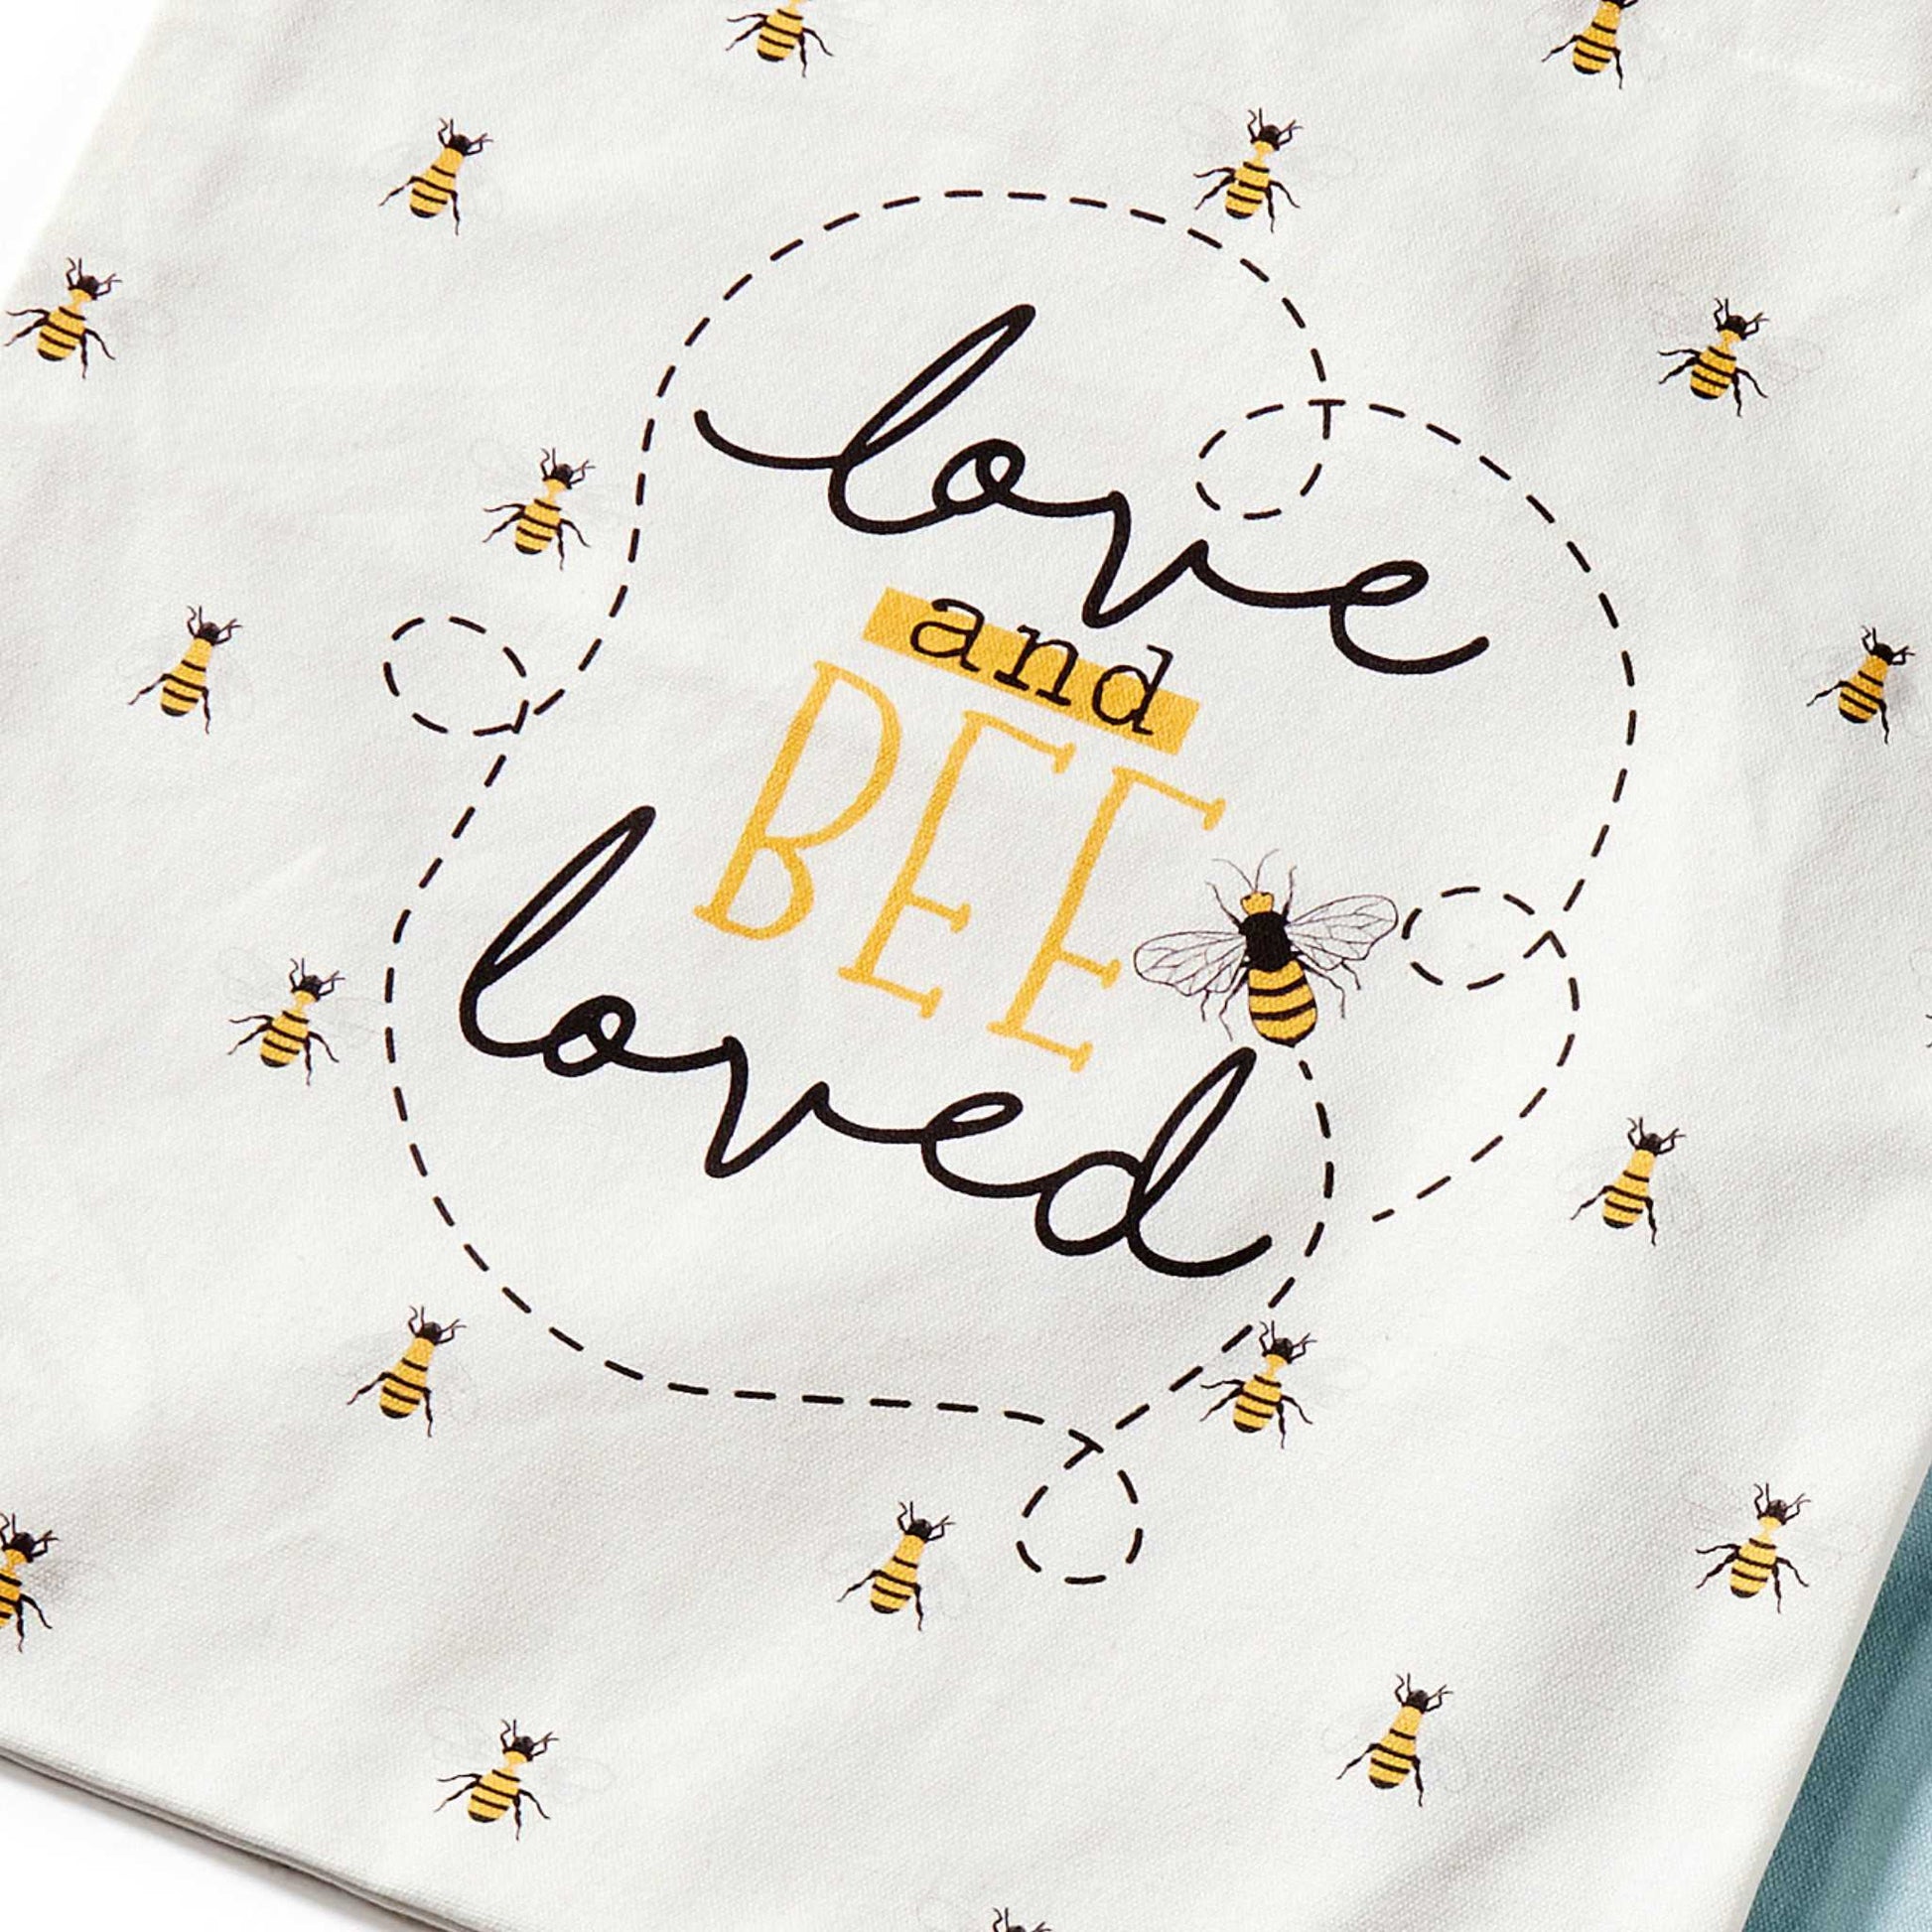 Shopping Totes Love and Bee Loved Tote Bag - Love and Bee Loved / Bee Happy - Bee Canvas Tote Bag